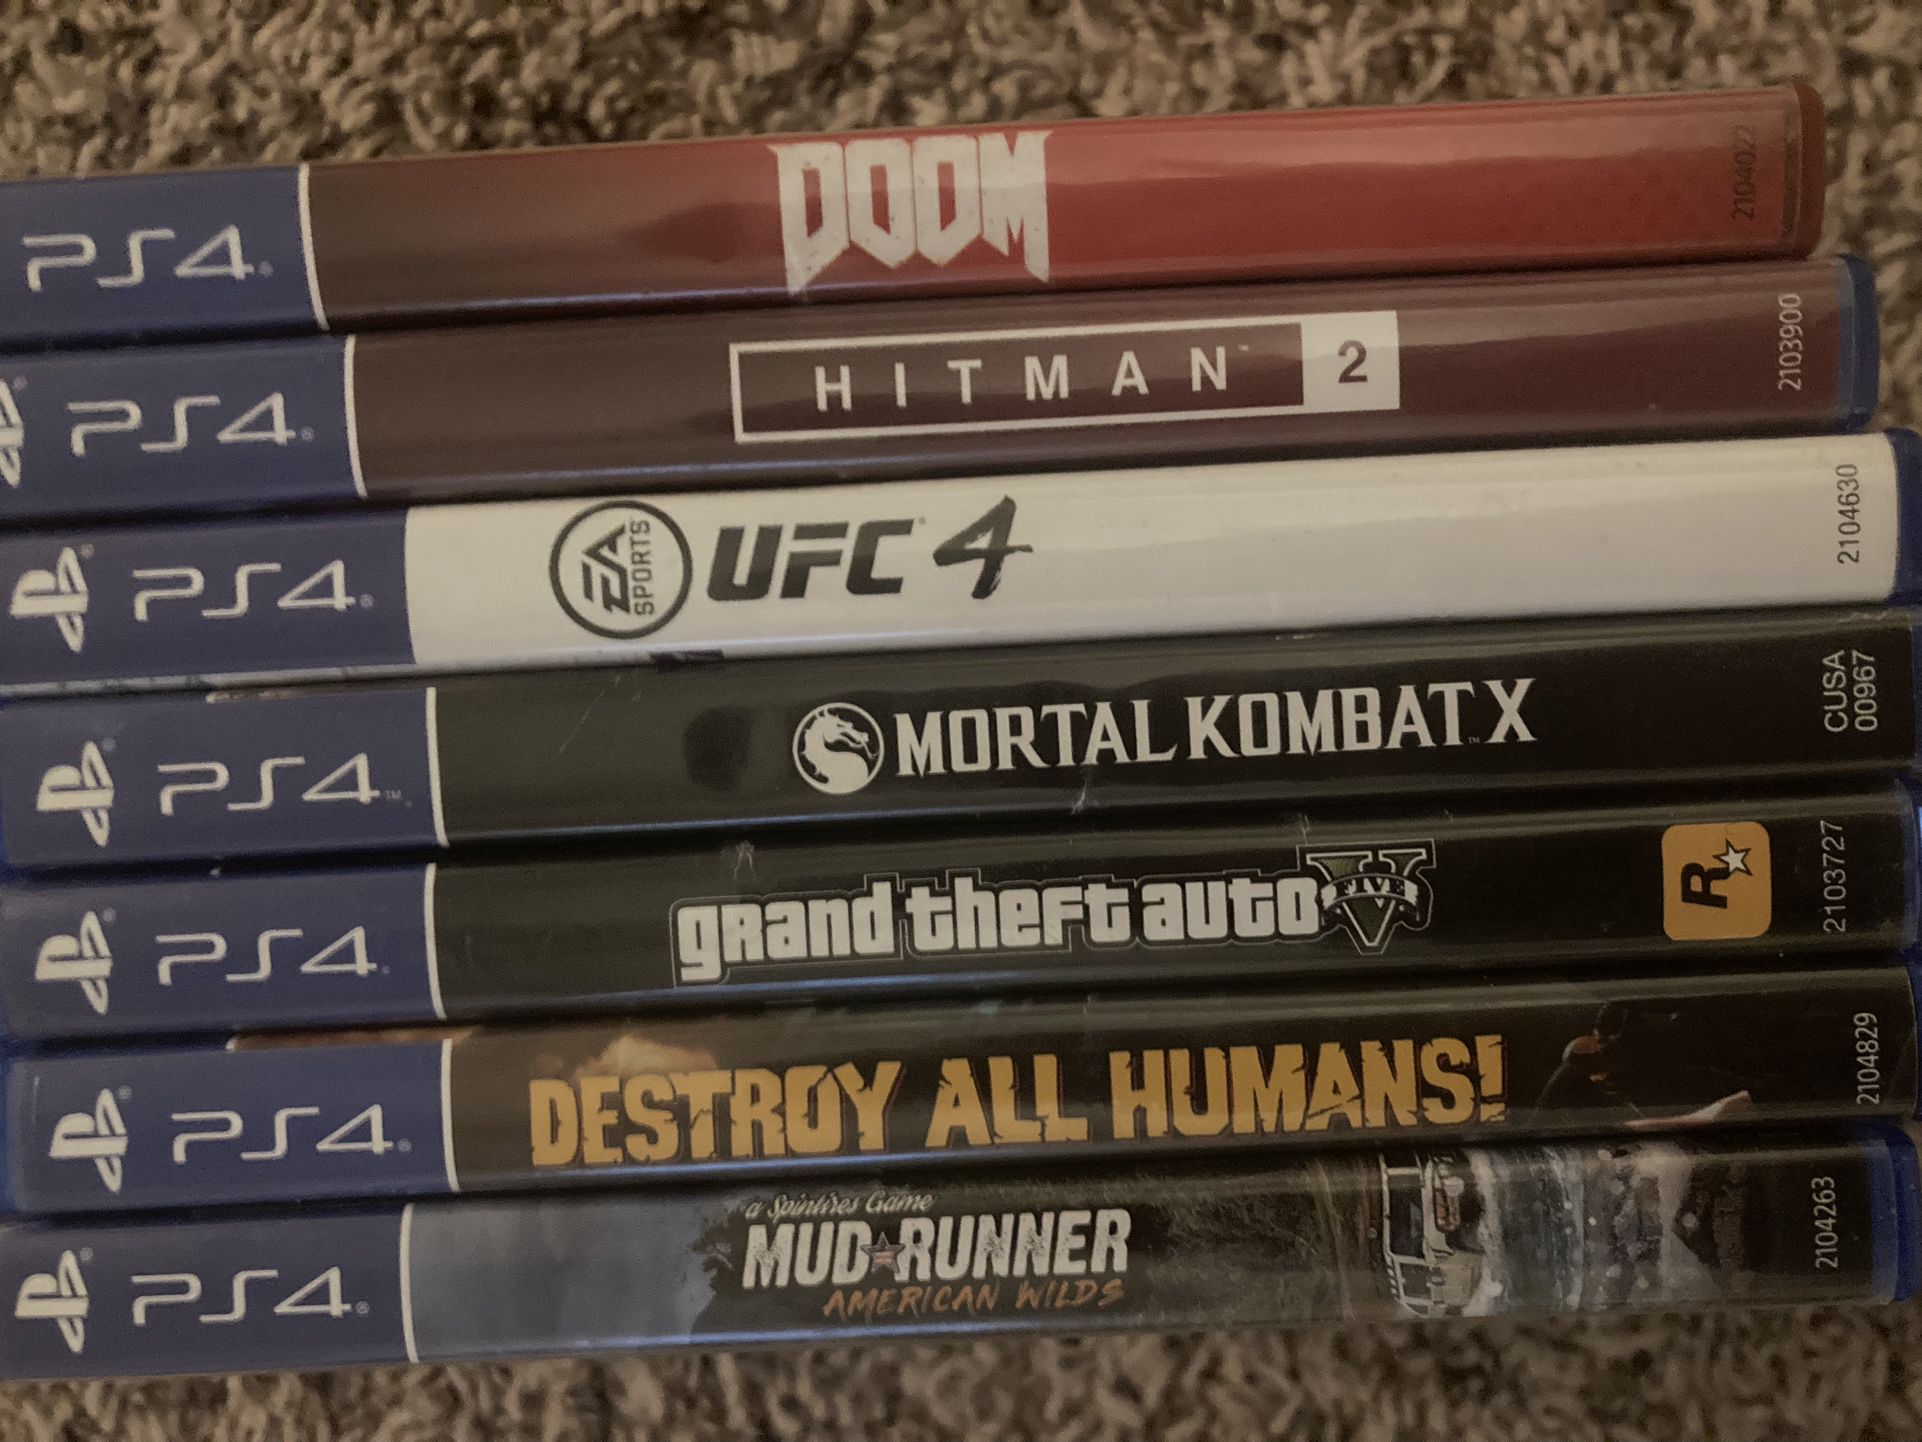 PS4 Game Lot 